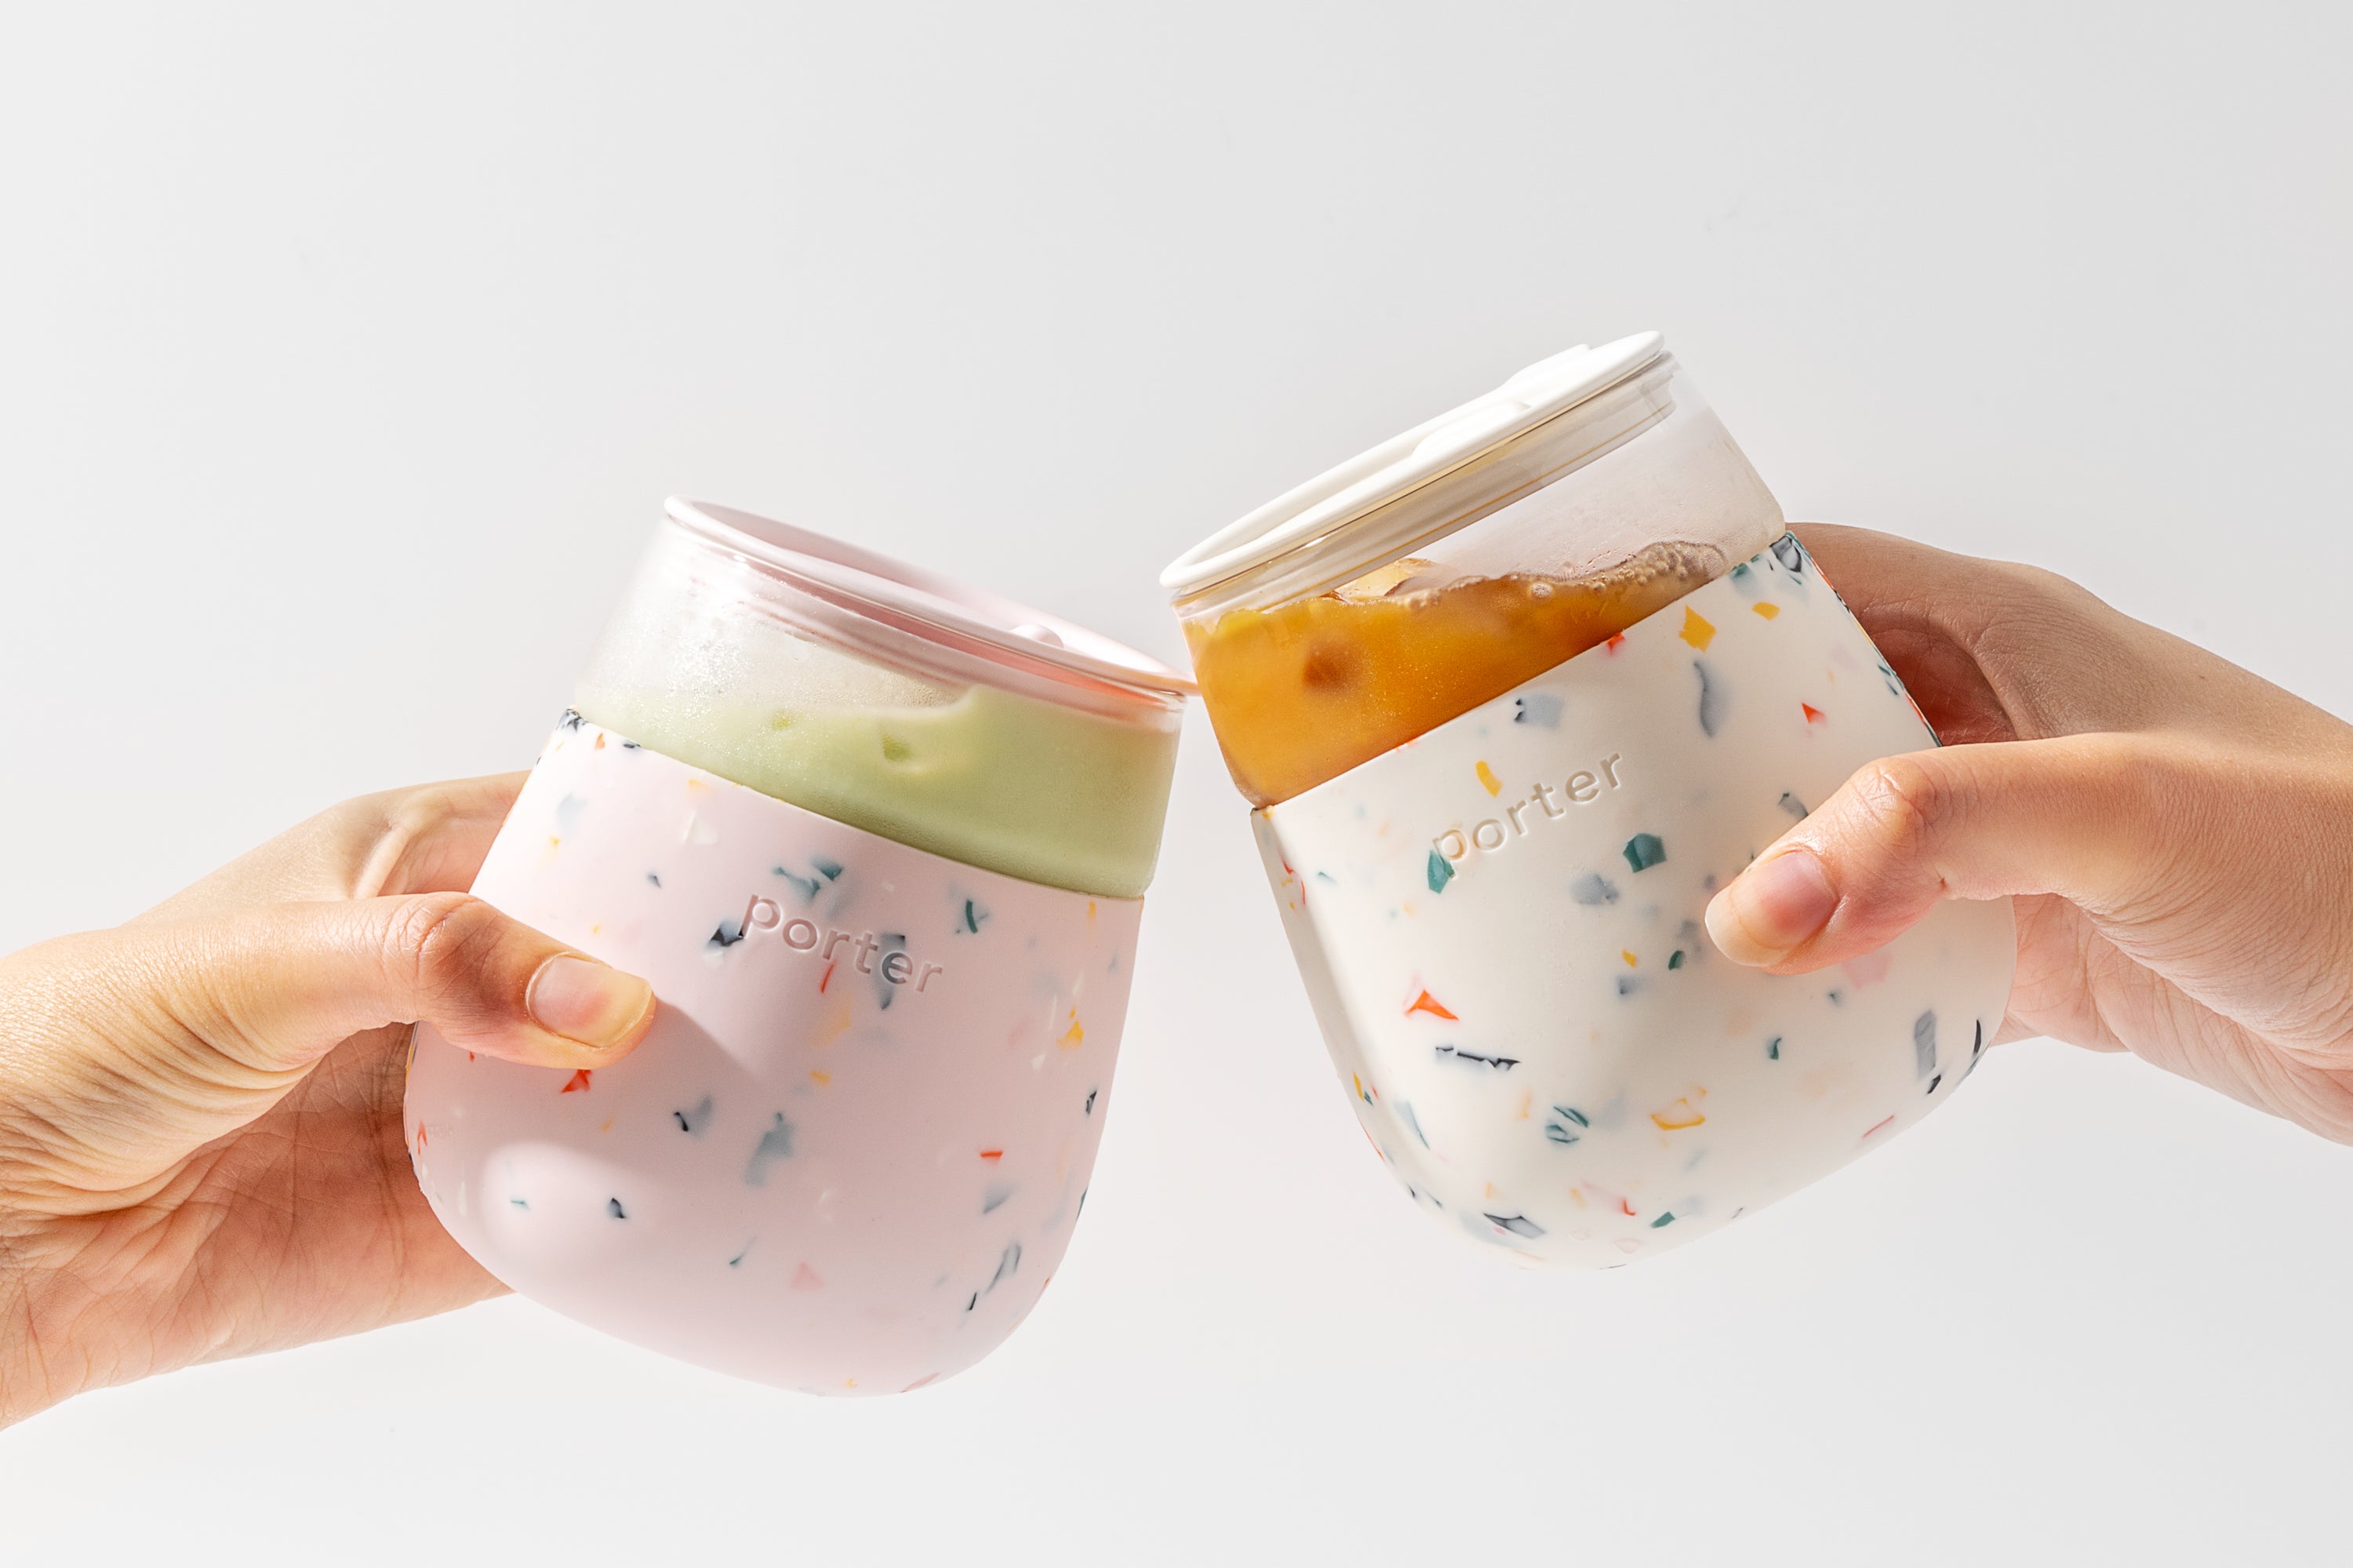 Blush and Cream Terrazzo Soft silicone wrap over clear glass — this infinitely reusable glass is great for wine, cocktails, & more on the go.